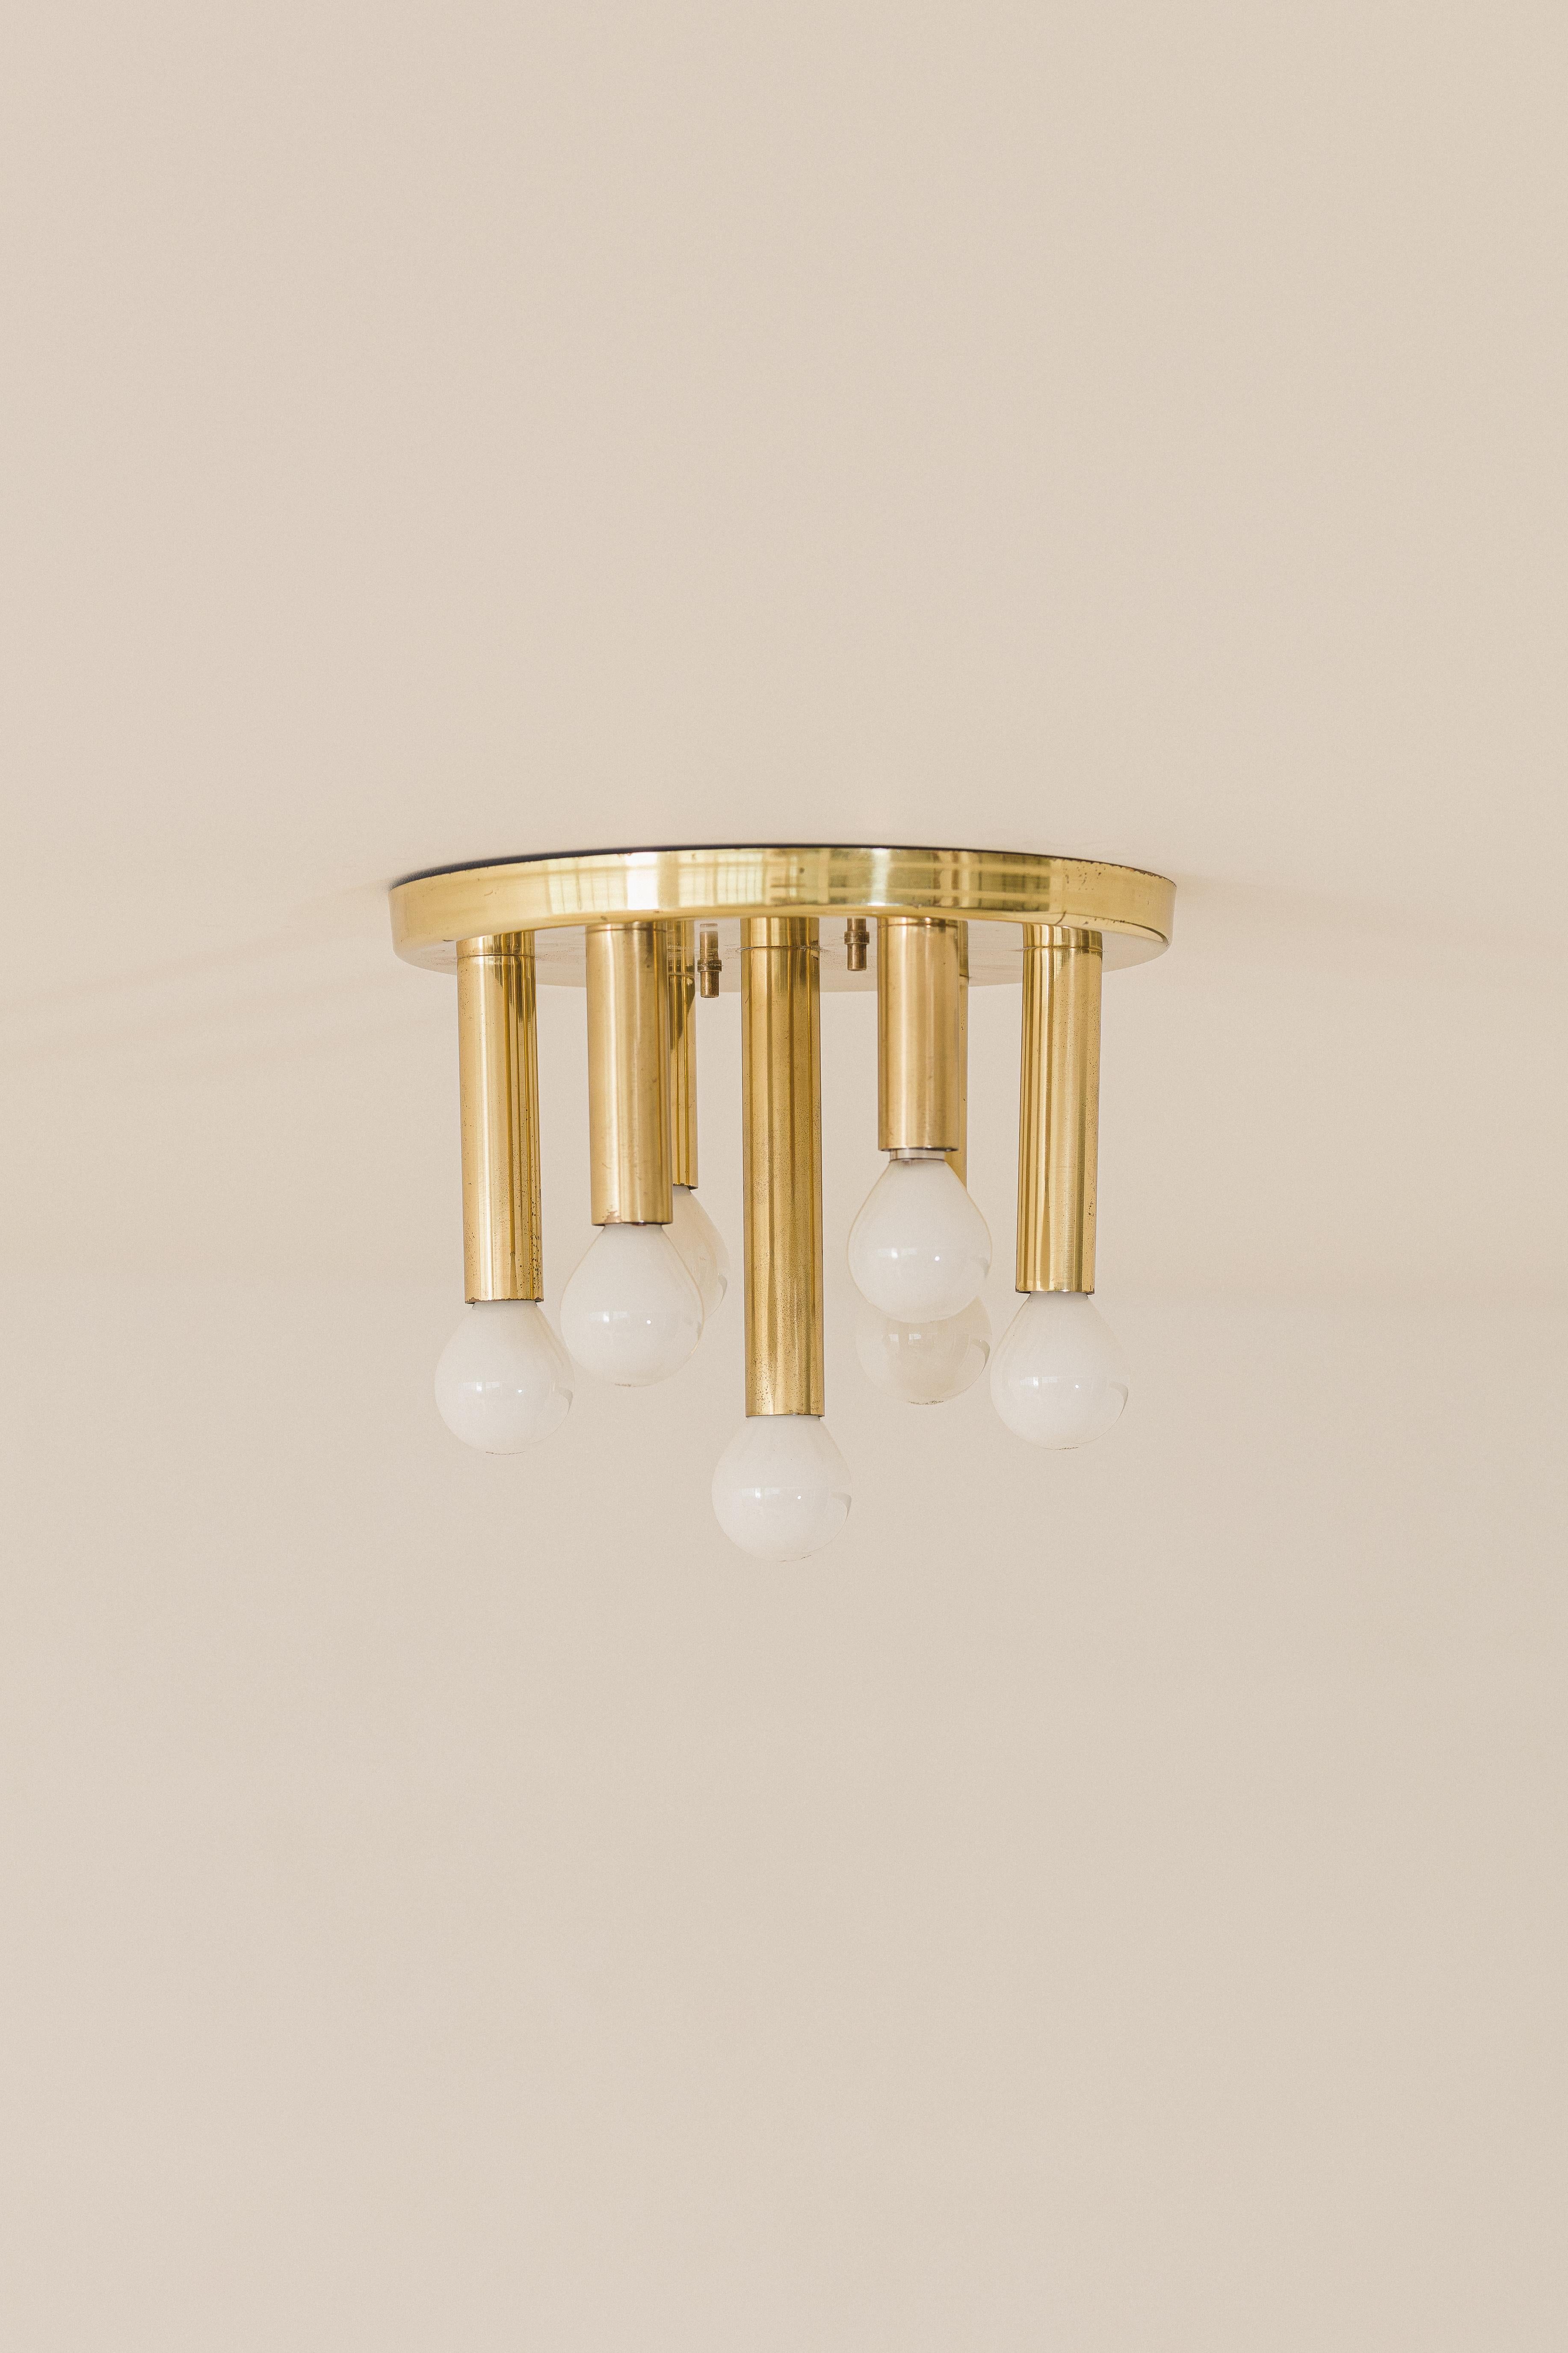 Vintage Brass Ceiling Lamp, Enrico Furio Modern Design, Dominici, Brazil, 1960 In Good Condition For Sale In New York, NY